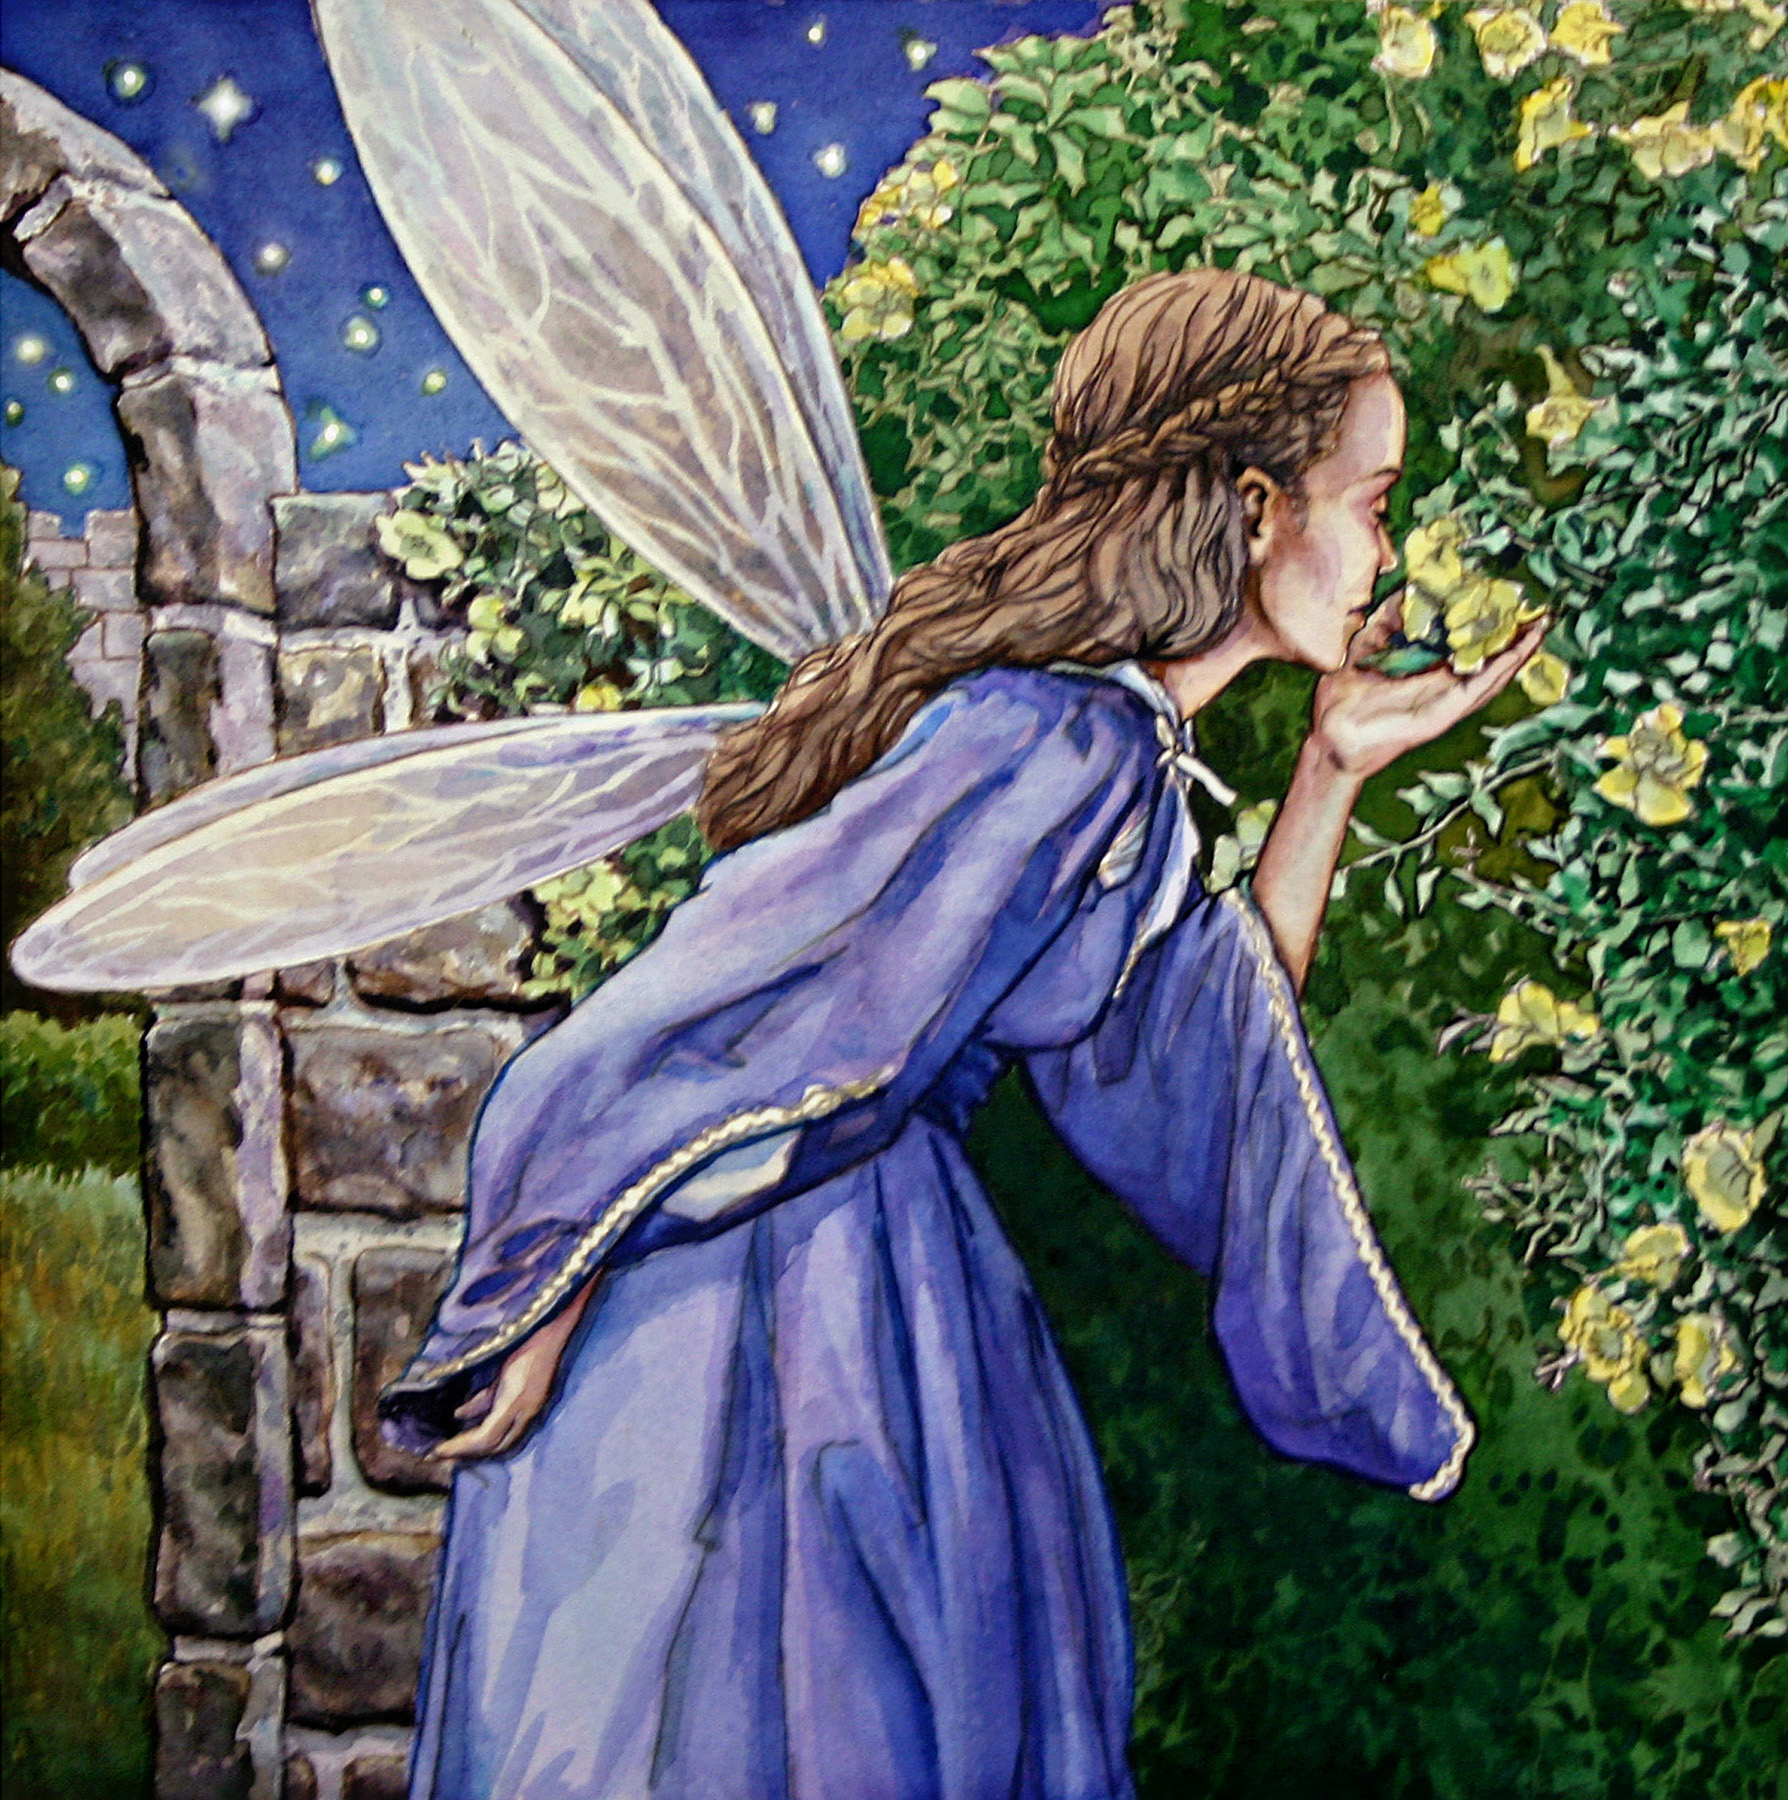 Painting of a fairy in a moonlit garden